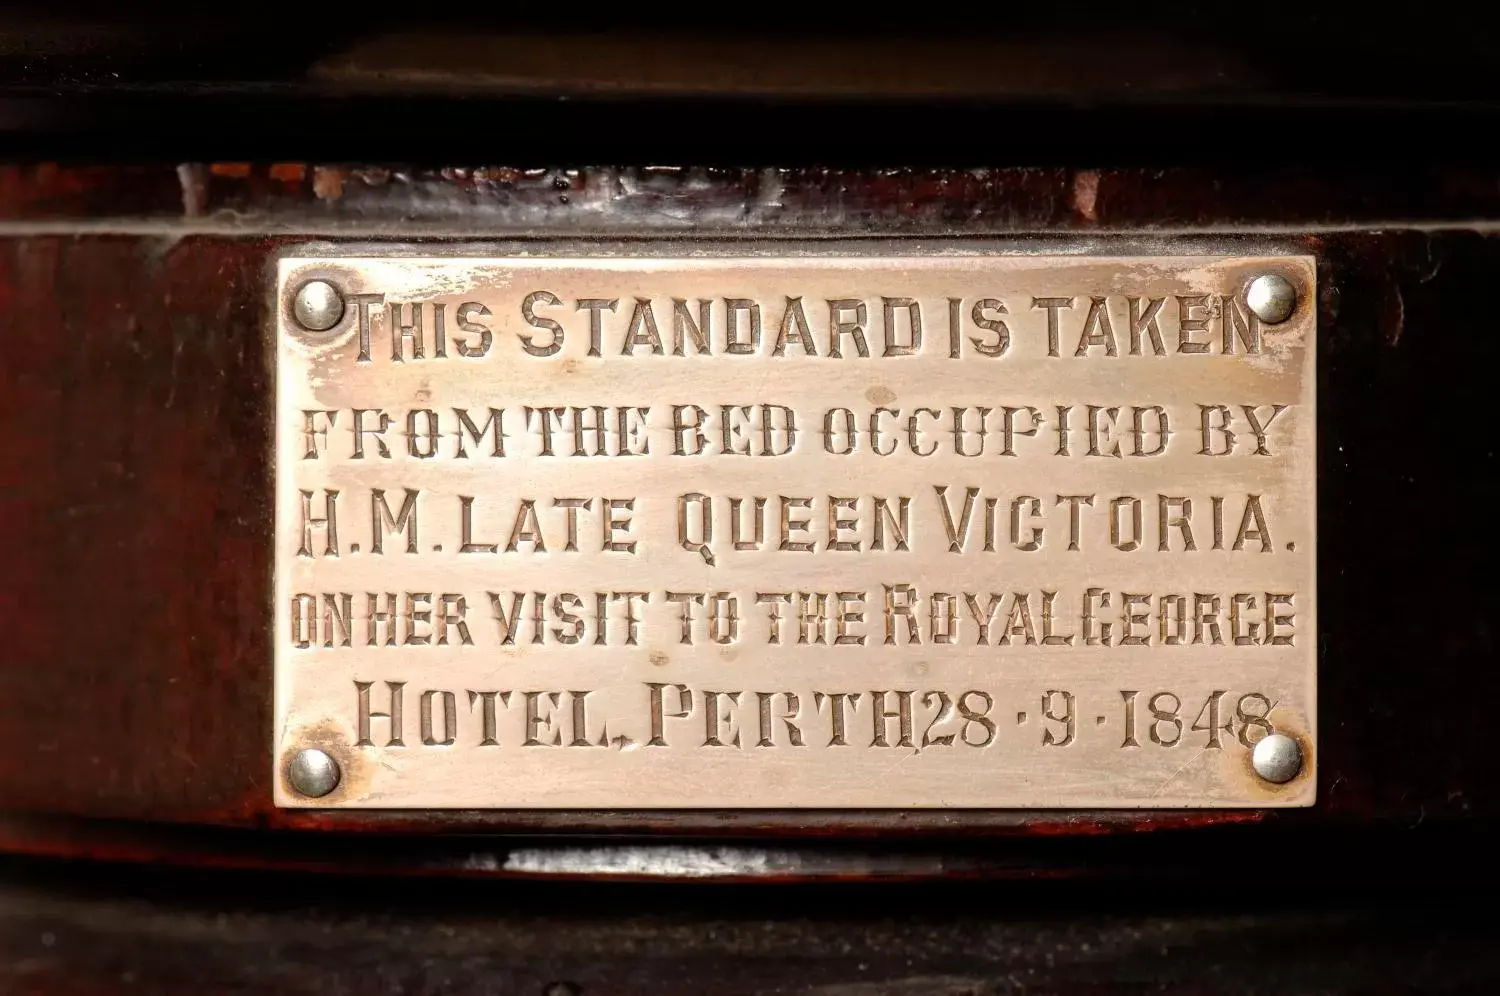 Other in The Royal George Hotel